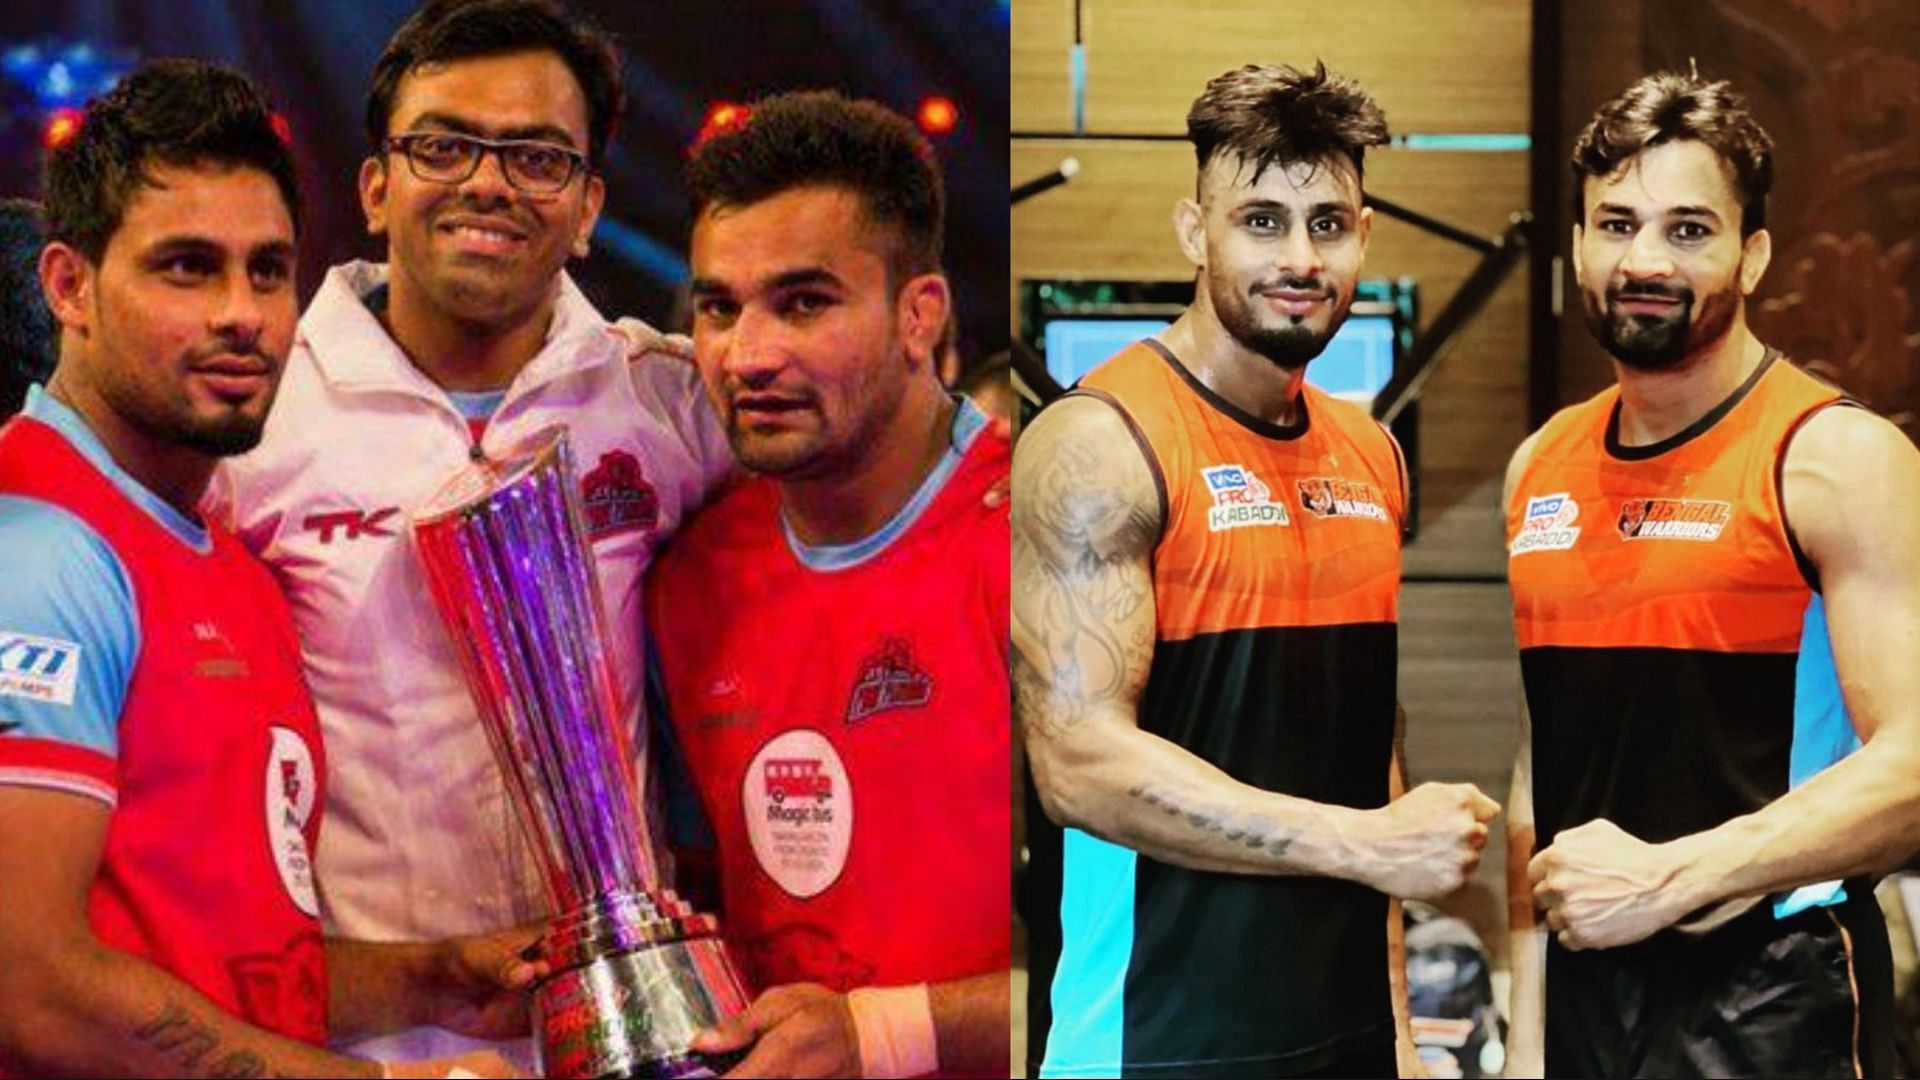 Maninder Singh and Ran Singh won PKL 1 with Jaipur Pink Panthers and are playing for Bengal Warriors in Pro Kabaddi 2022